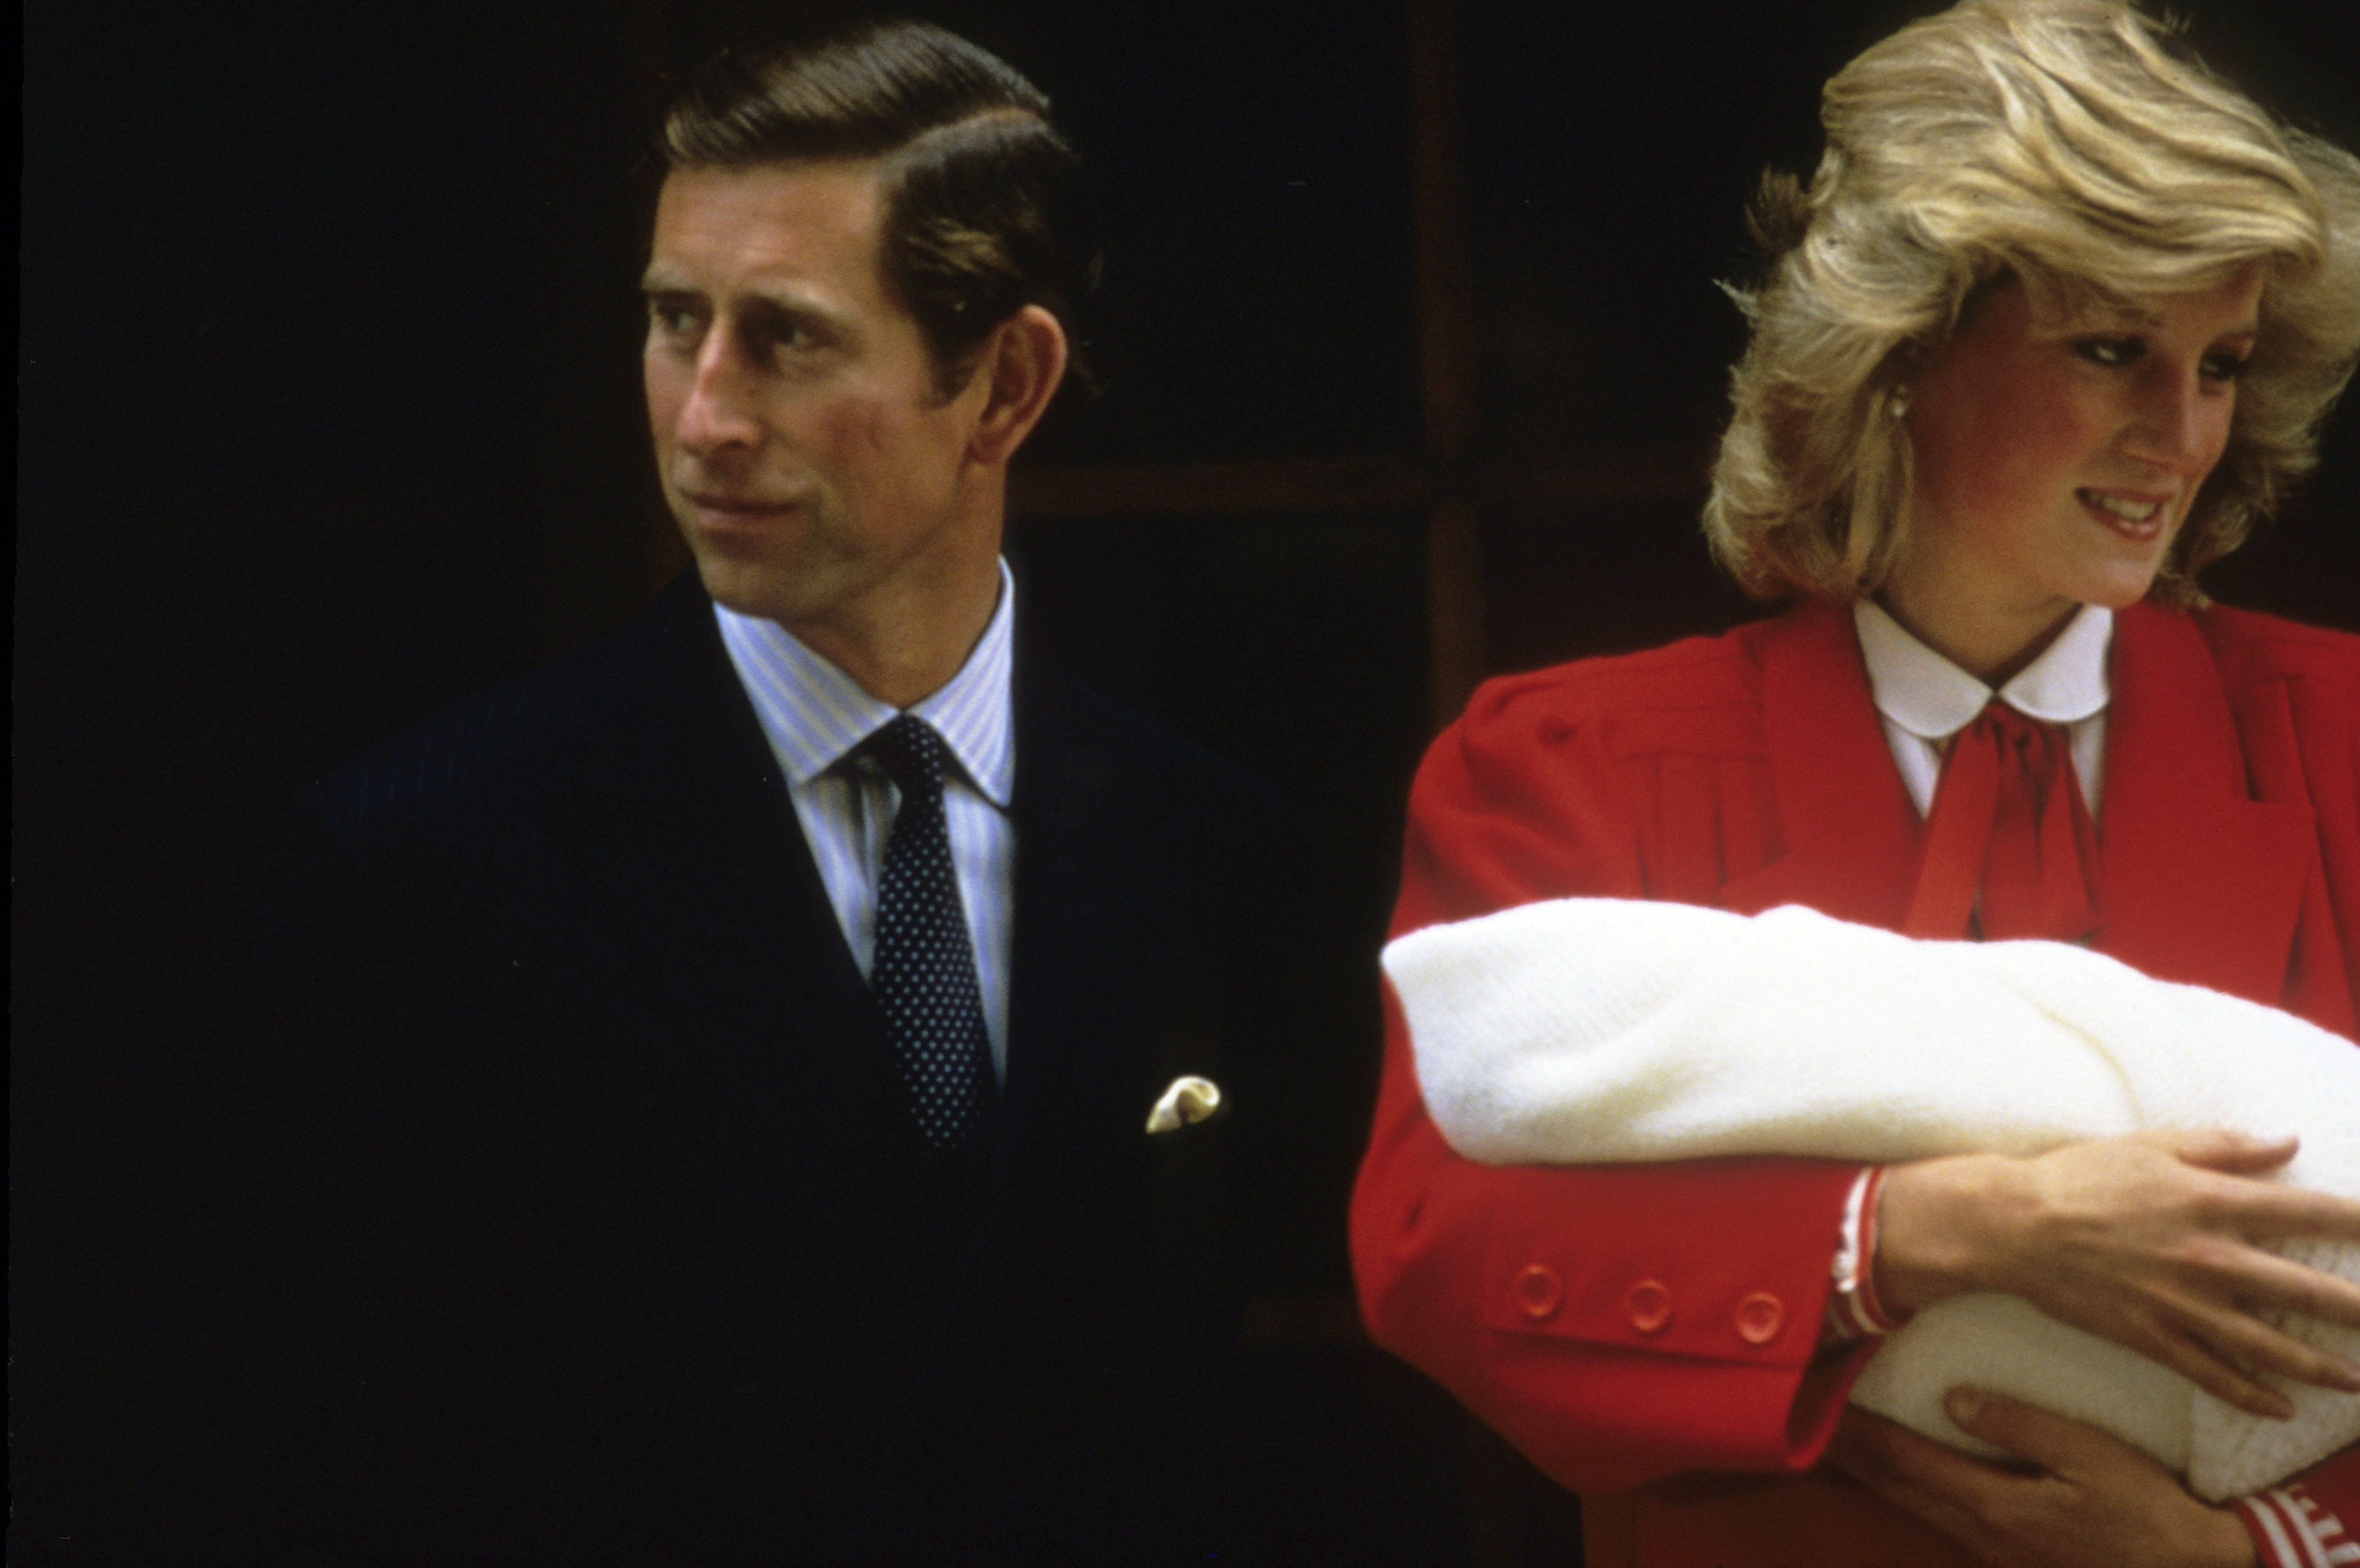  Diana, Princess of Wales and Prince Charles, Prince of Wales leave the Lindo Wing of St. Mary's Hospital following the birth of Prince Harry on September 16, 1984 in London, England. | Source: Getty Images